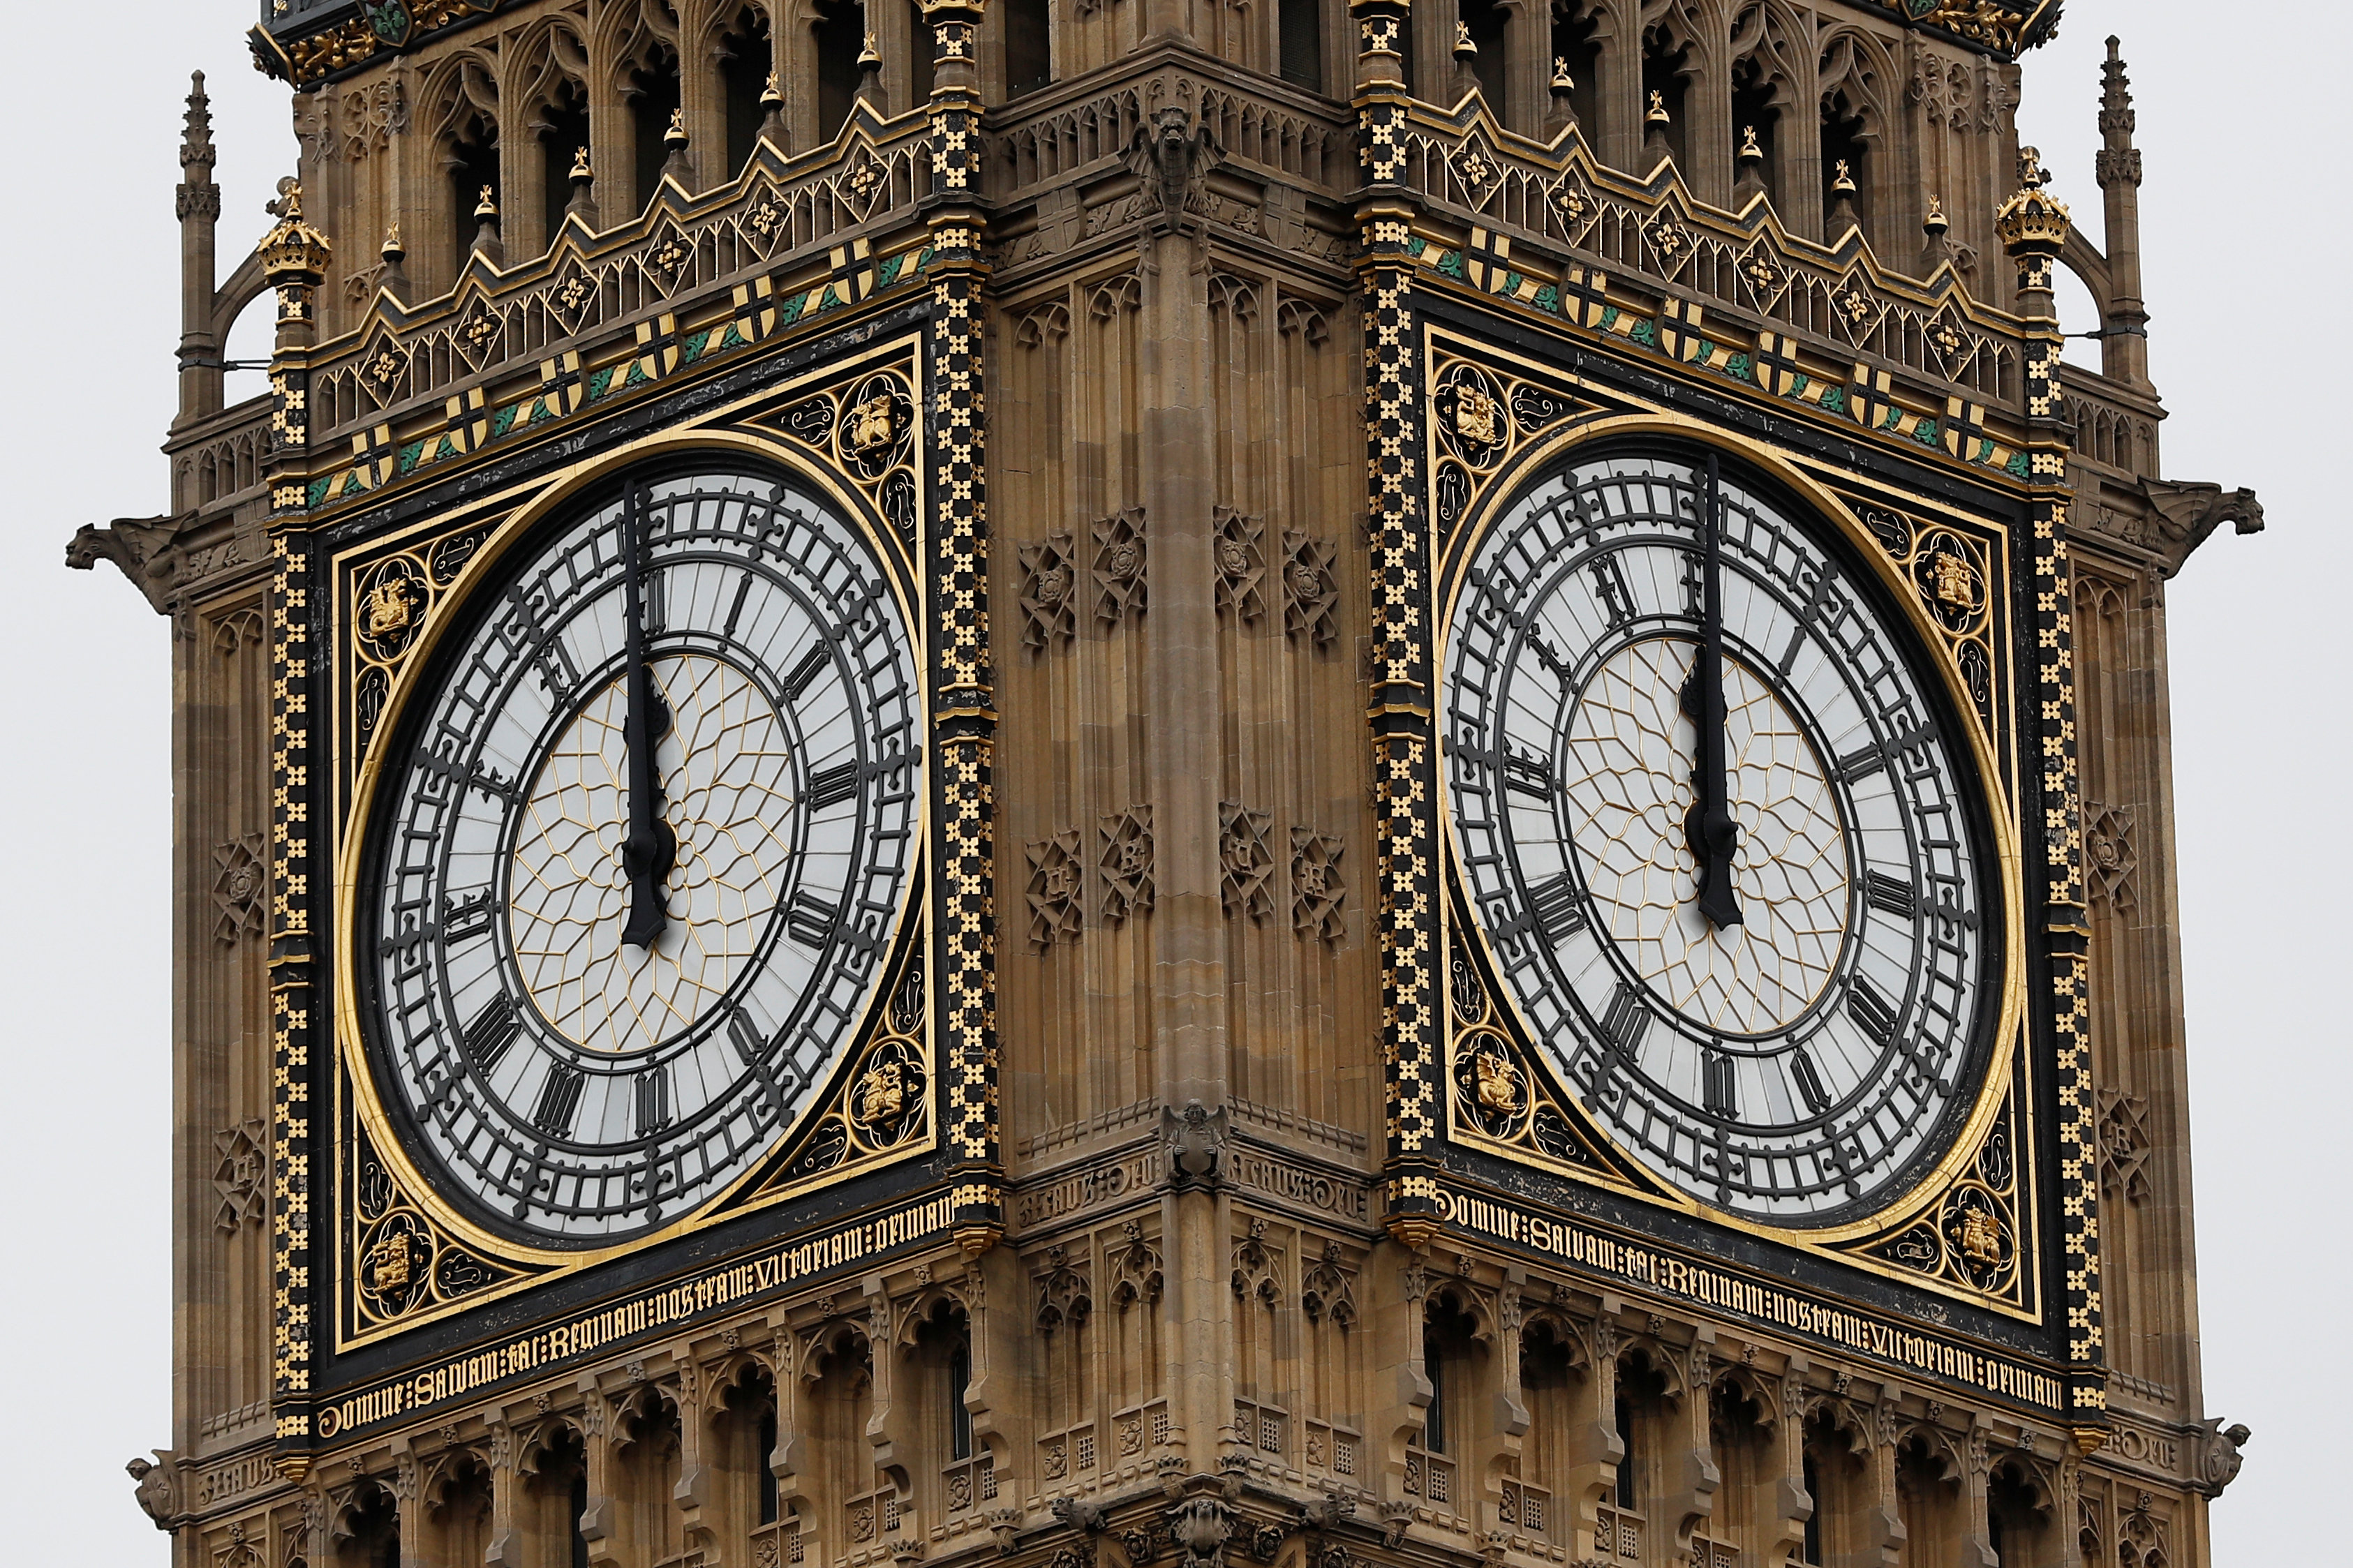 The 'Big Ben' bell chimes for the last time in four years ahead of restoration work on the Elizabeth Tower, which houses the Great Clock and the 'Big Ben' bell, at the Houses of Parliament in London